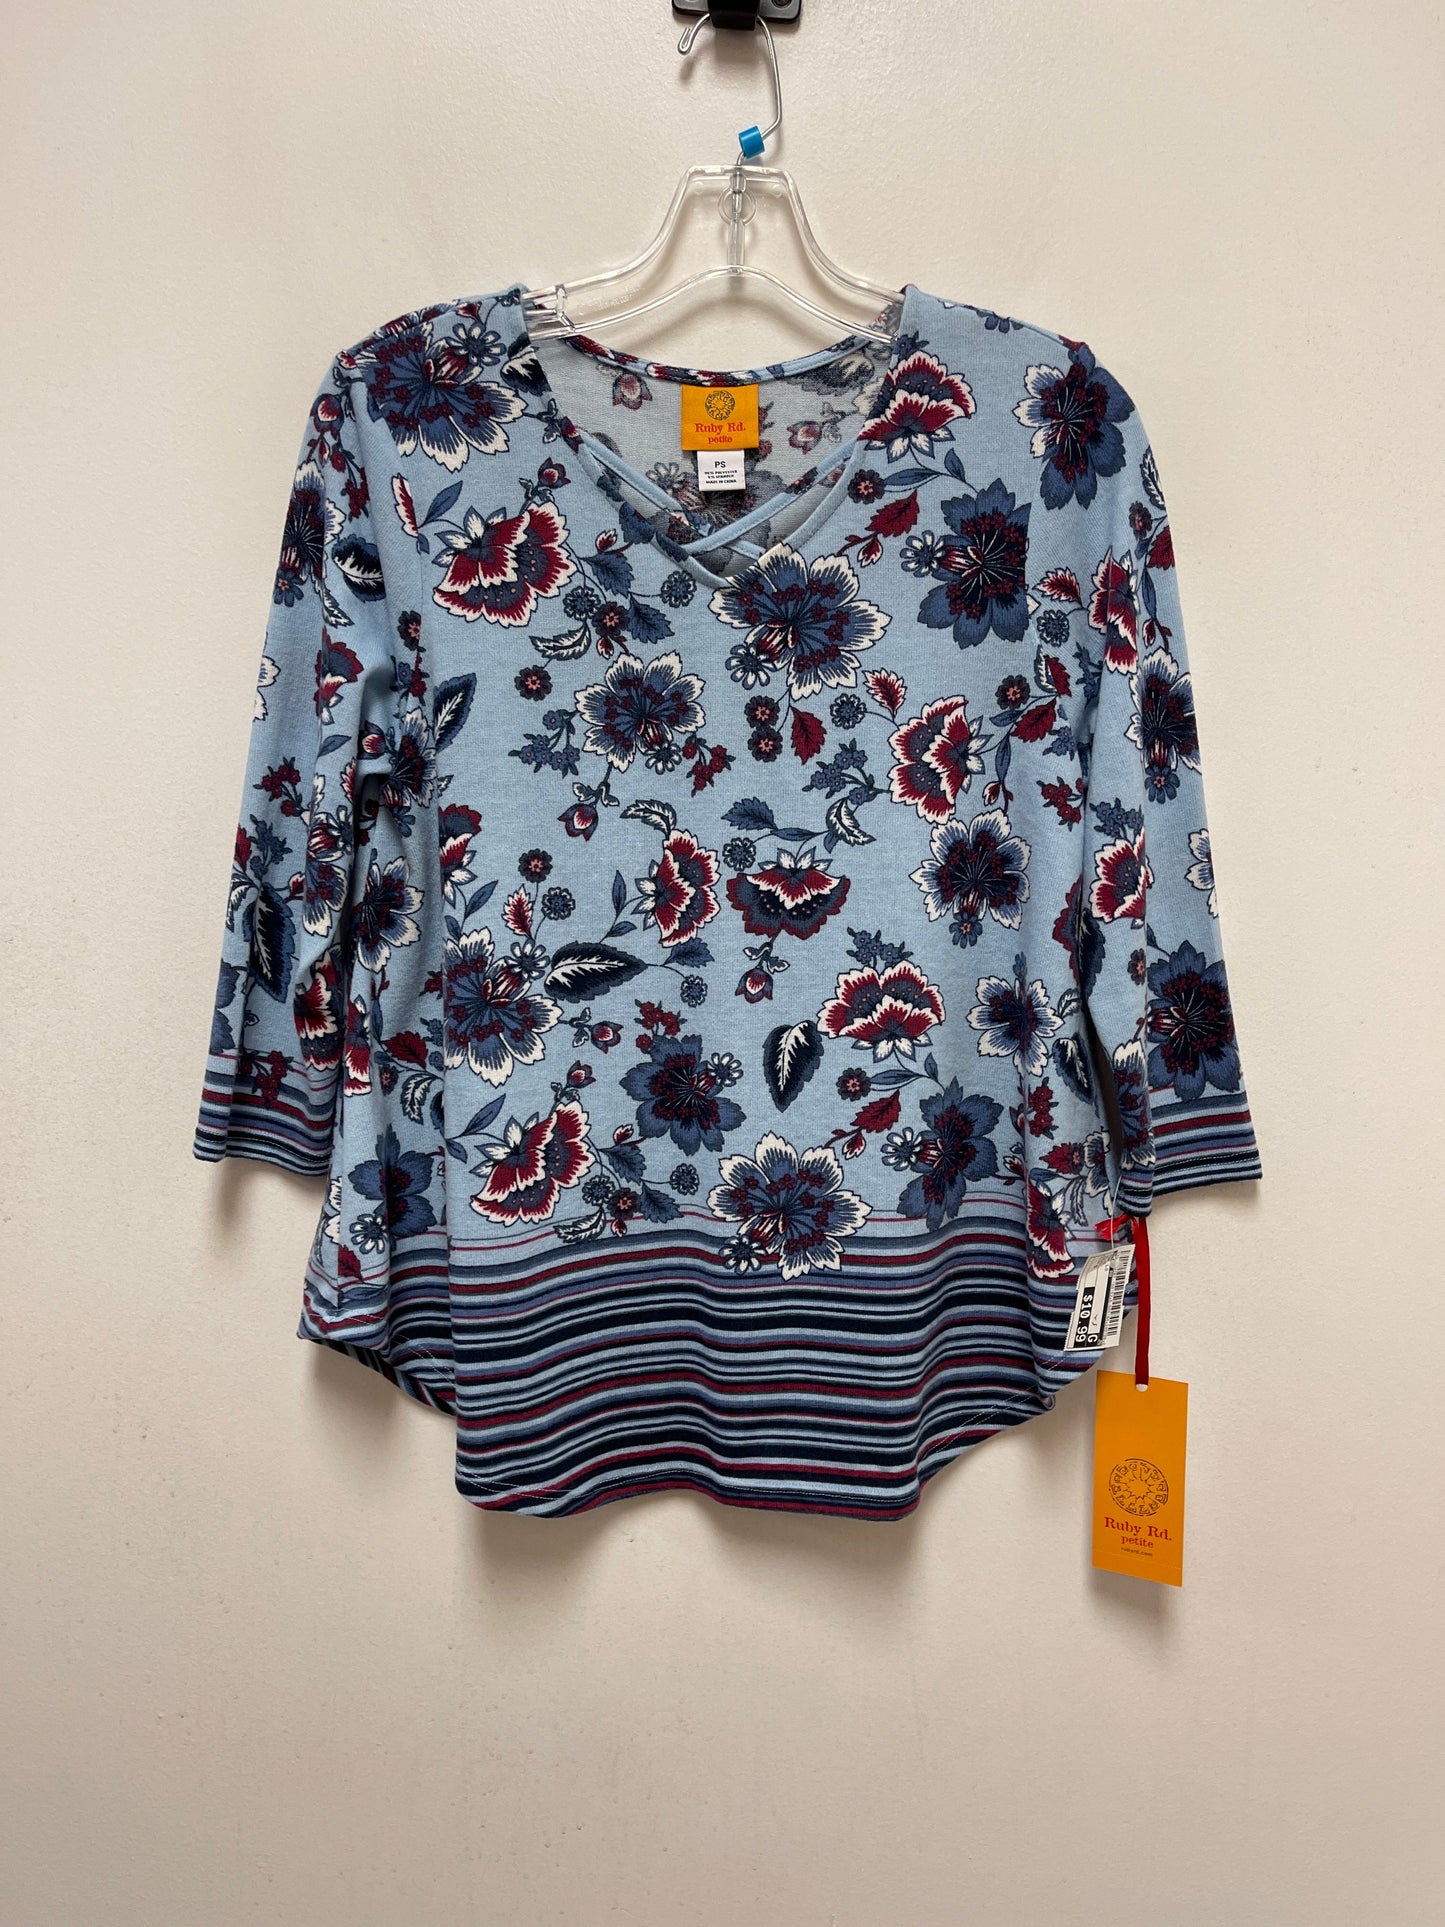 Blue Top Long Sleeve Ruby Rd, Size S